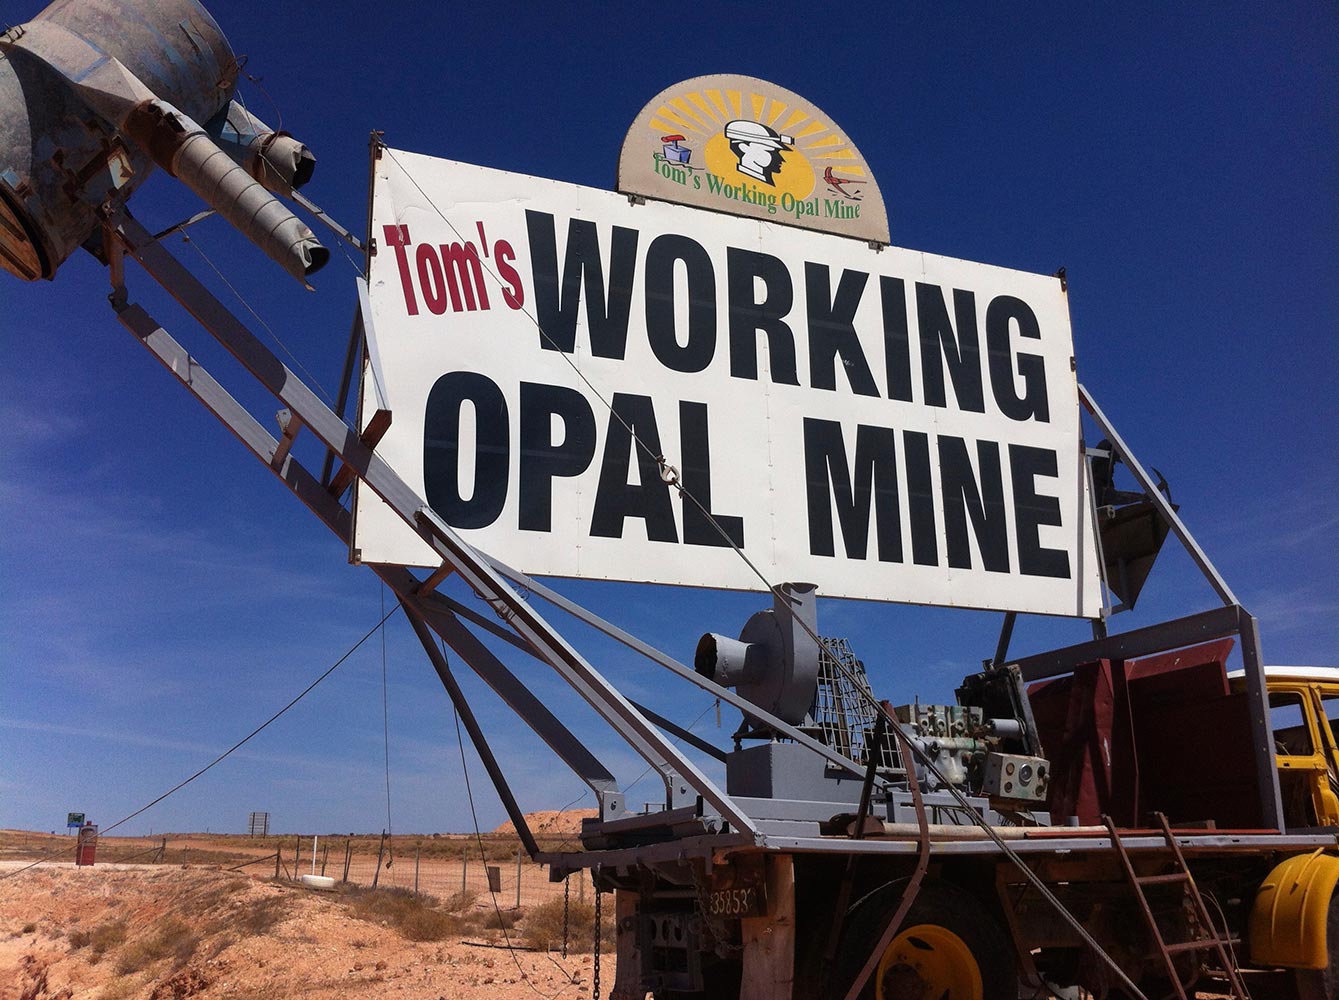 coober pedys residents live in underground dugouts tom s working opal mine